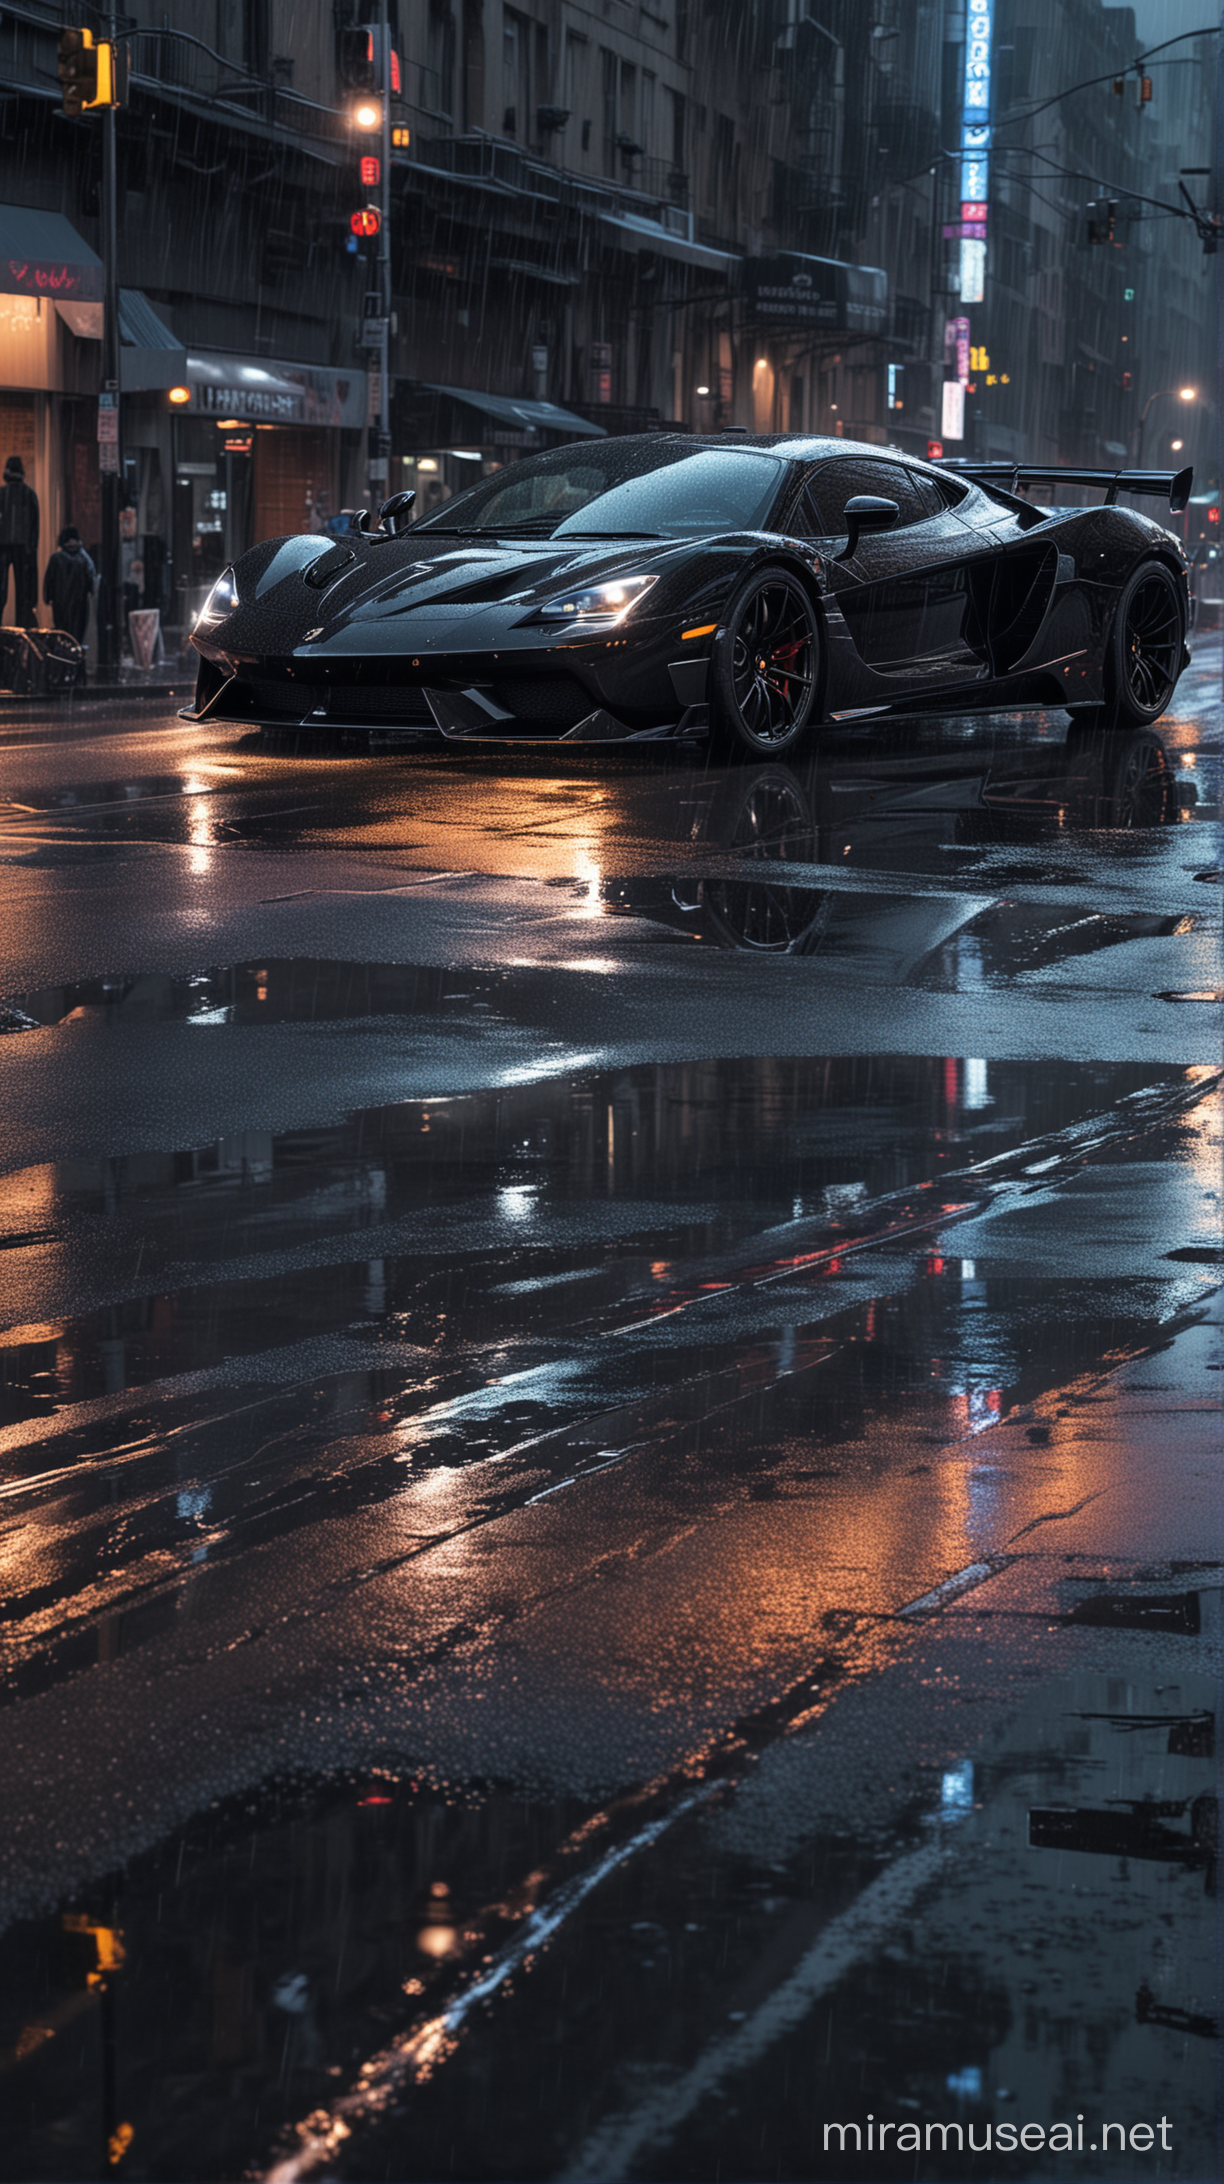 A sleek, black supercar speeding down a rain-soaked city street at night, with reflections of neon lights on its polished surface and the wet road, creating a sense of speed and urban elegance.